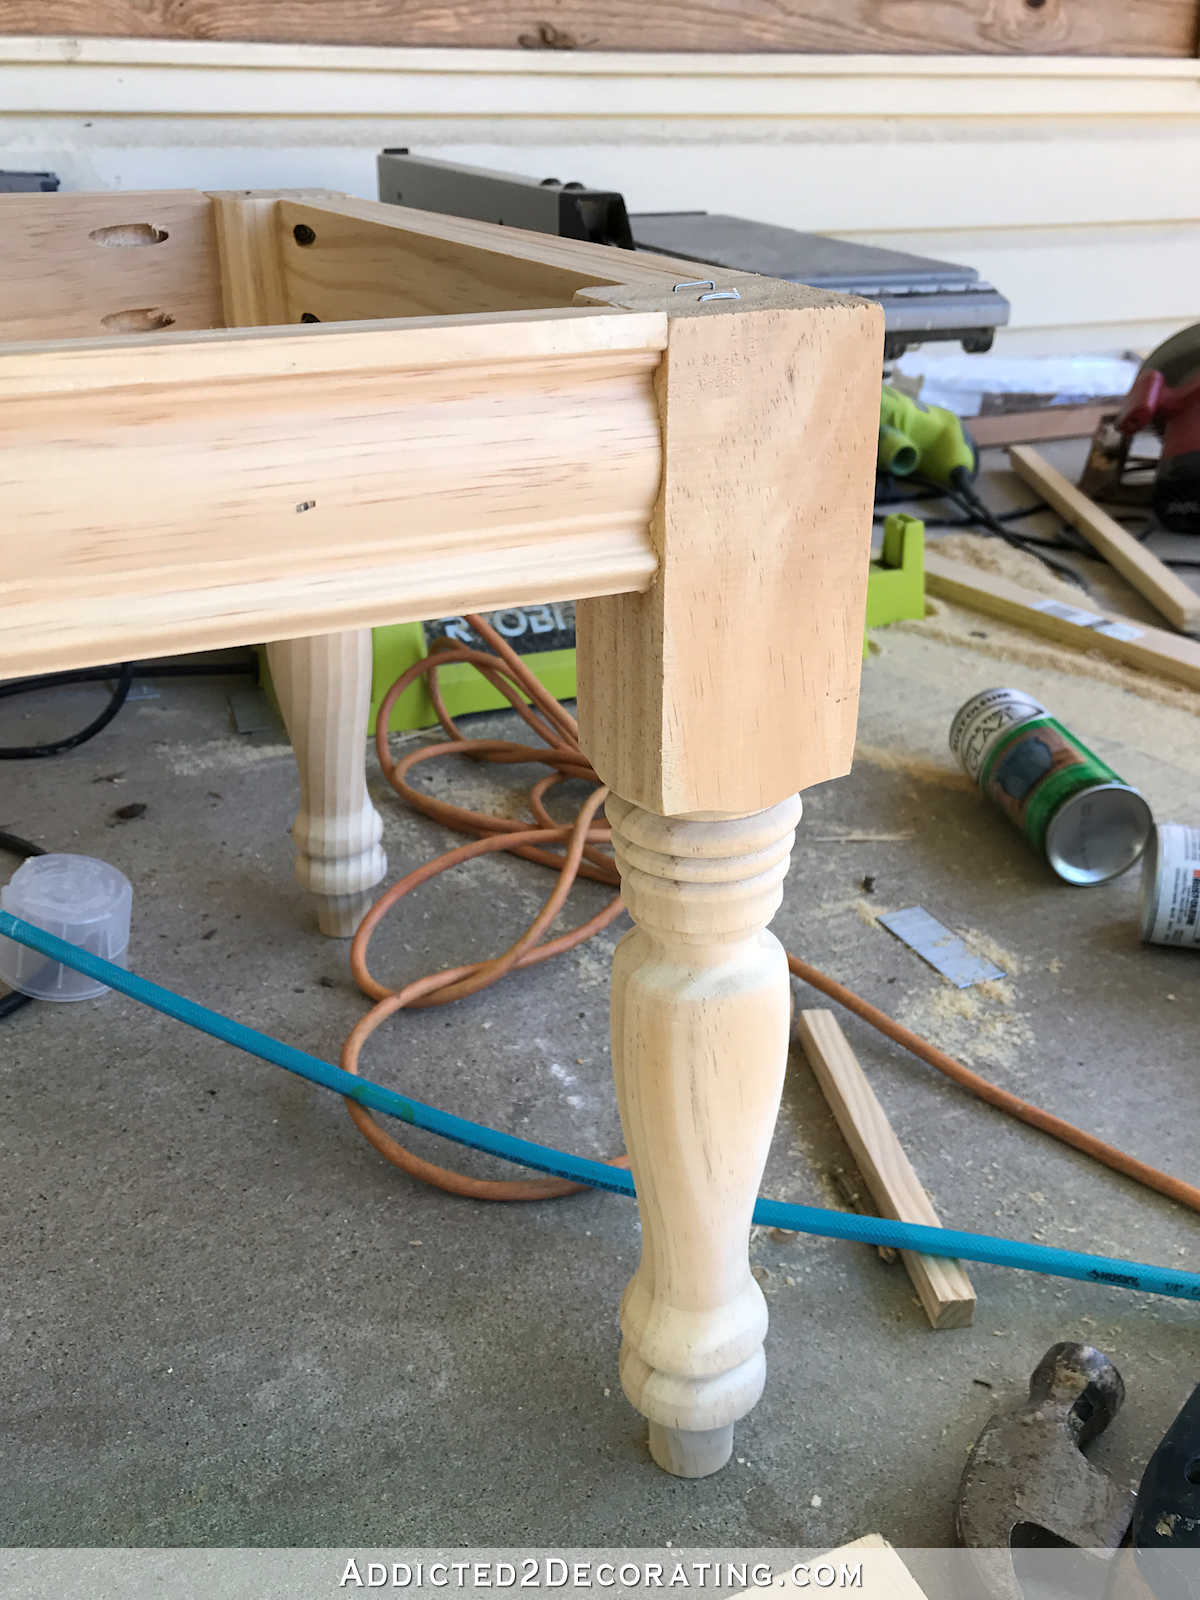 DIY Upholstered Dining Room Bench – How To Build The Frame